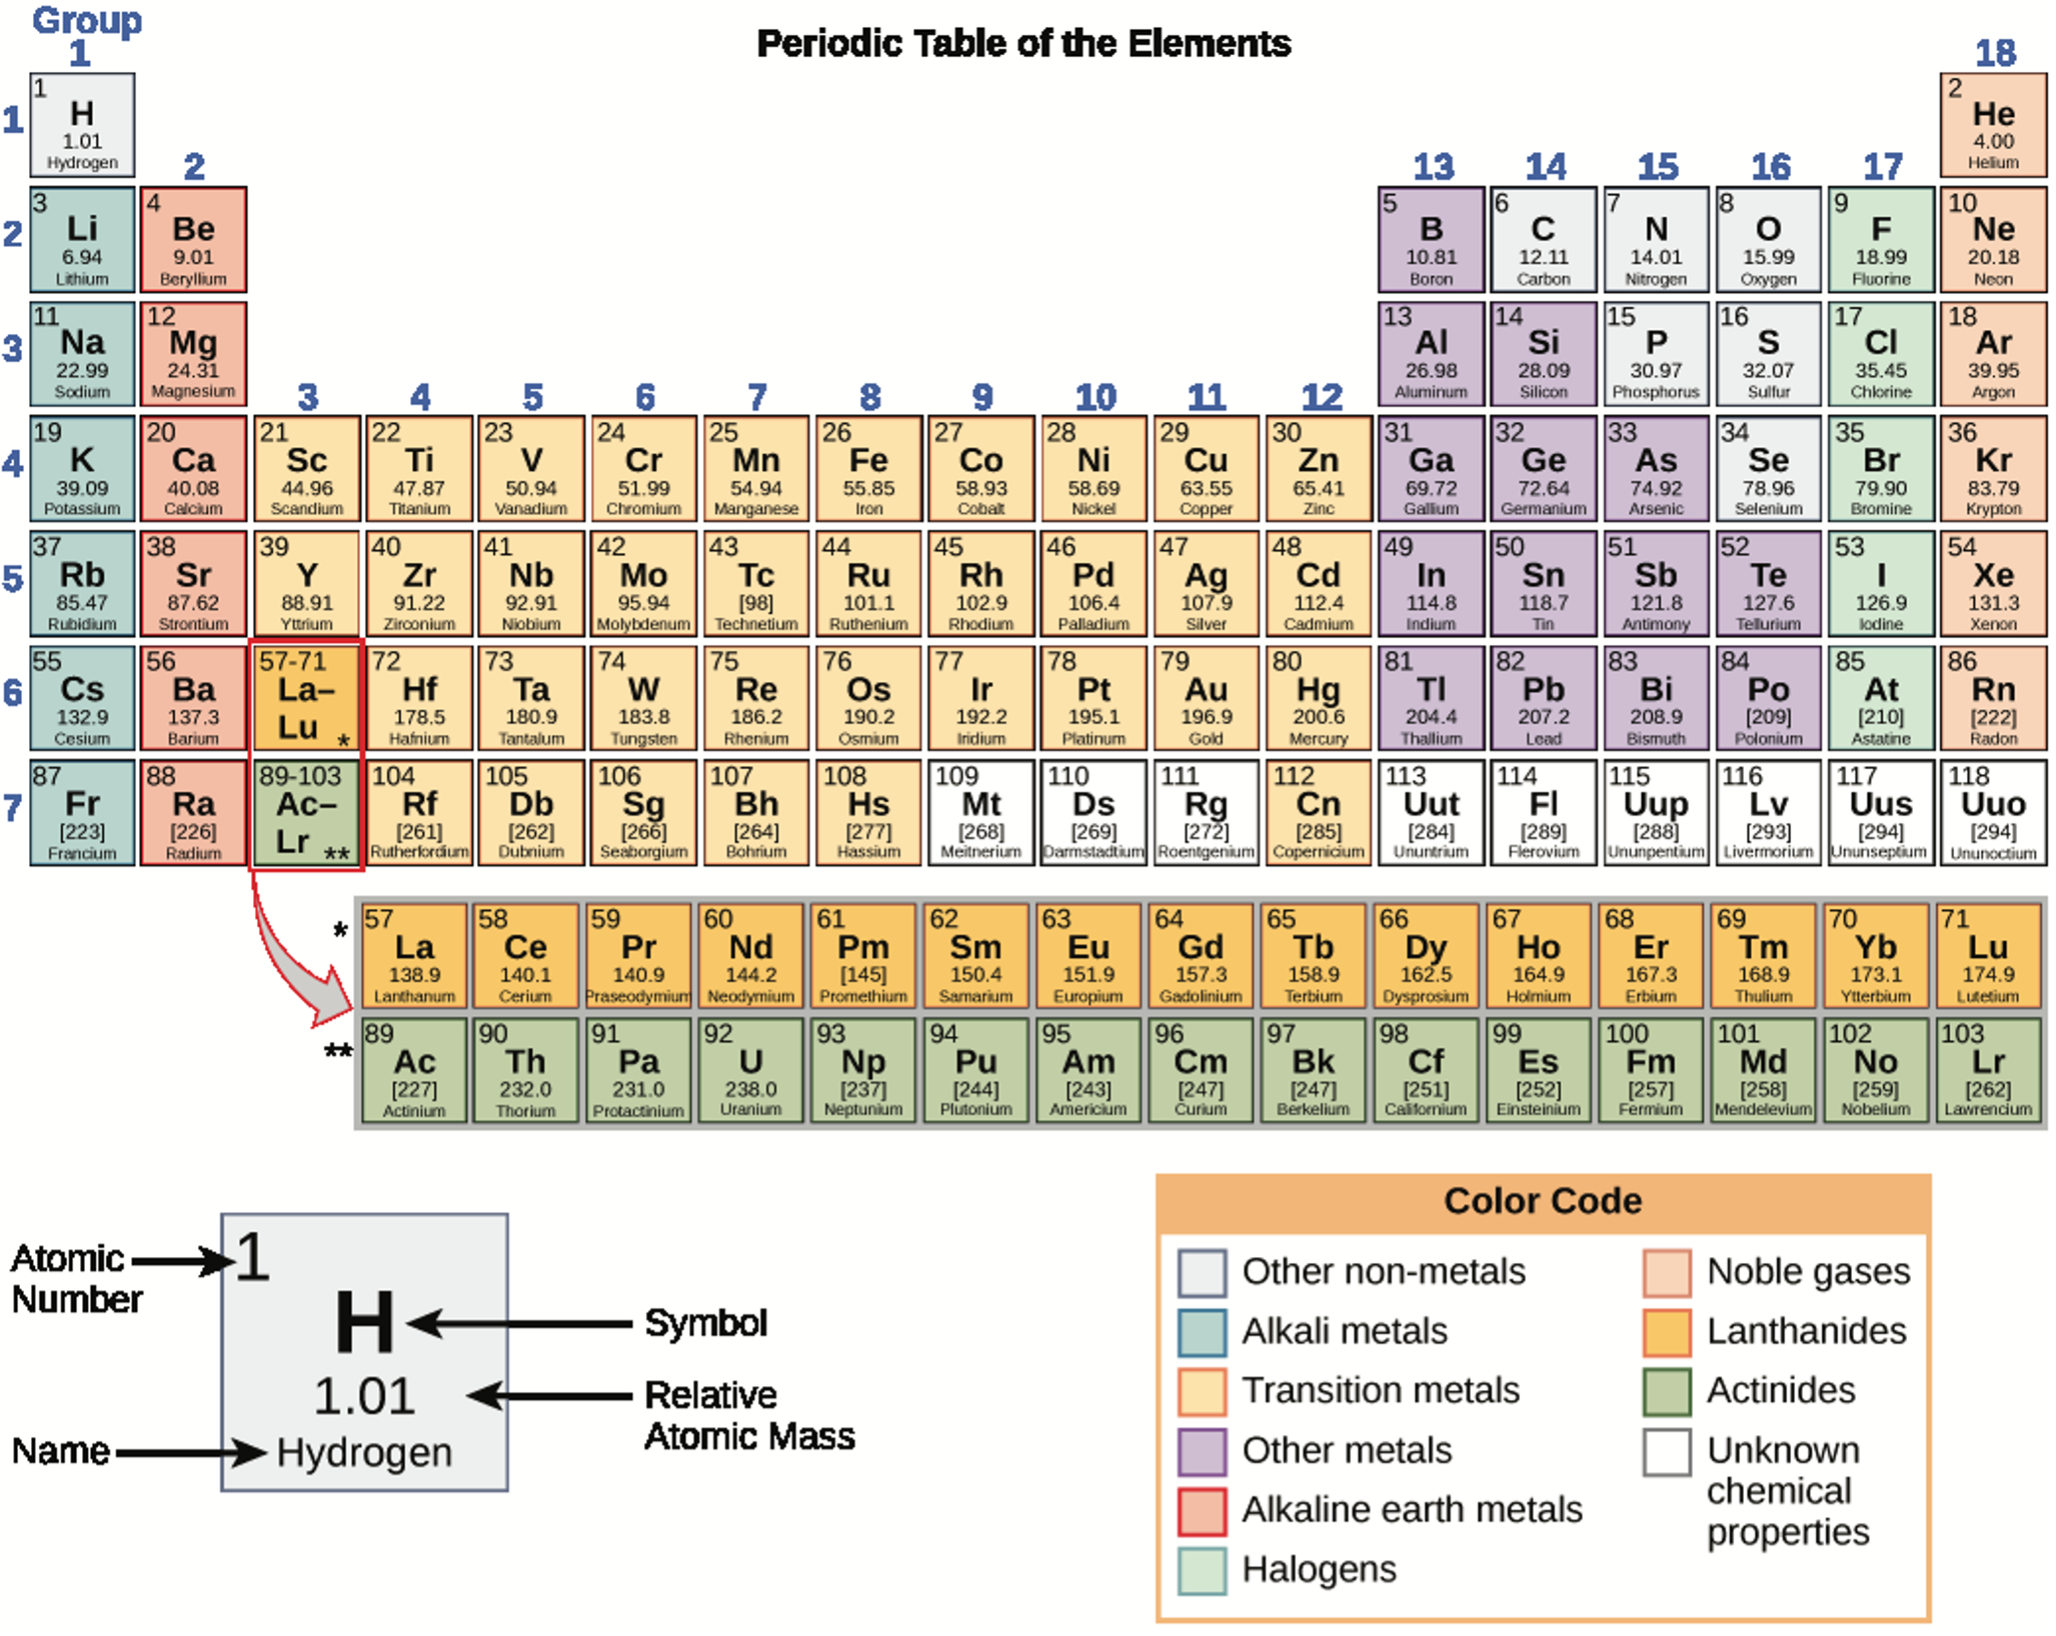 Periodic table of elements.